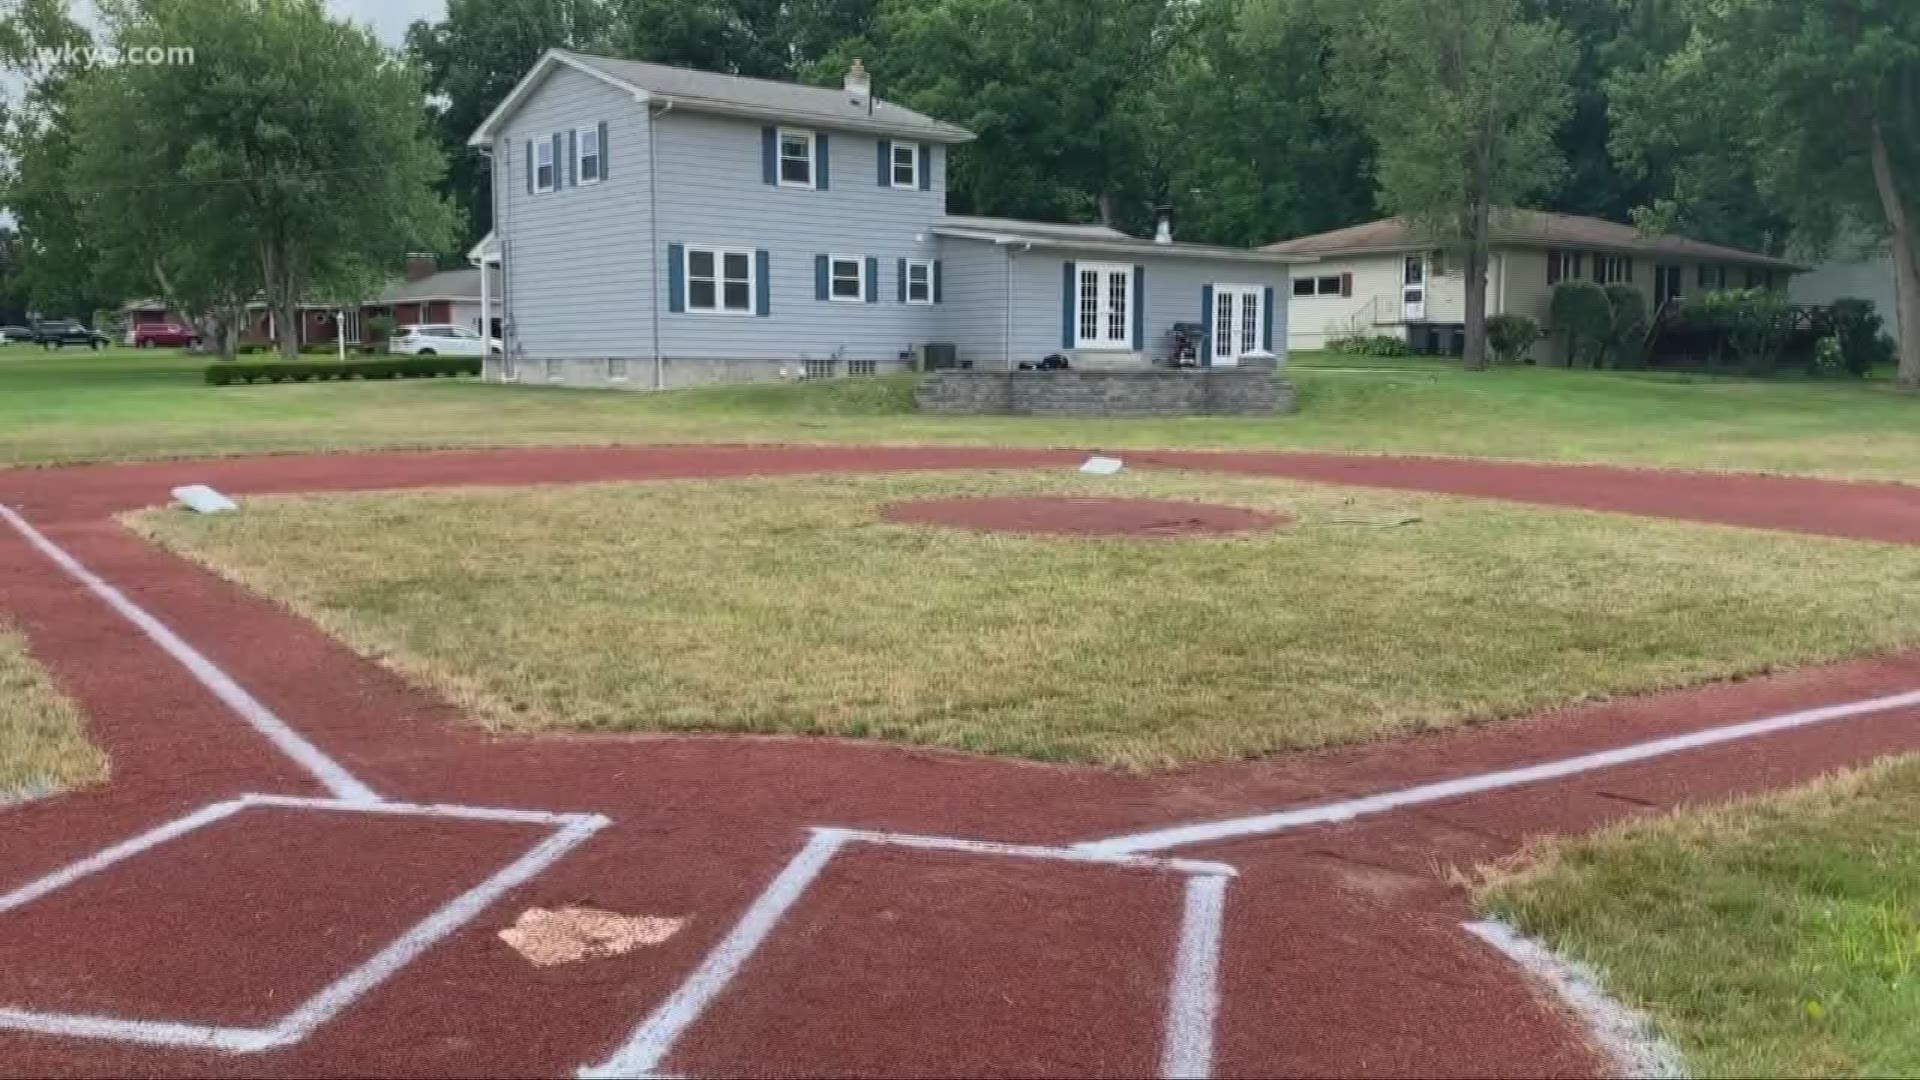 July 9, 2019: Now this is a true love for baseball. We met a dad in Brookfield, Ohio, who made his 5-year-old son's dreams come true by building a baseball field in their own backyard.